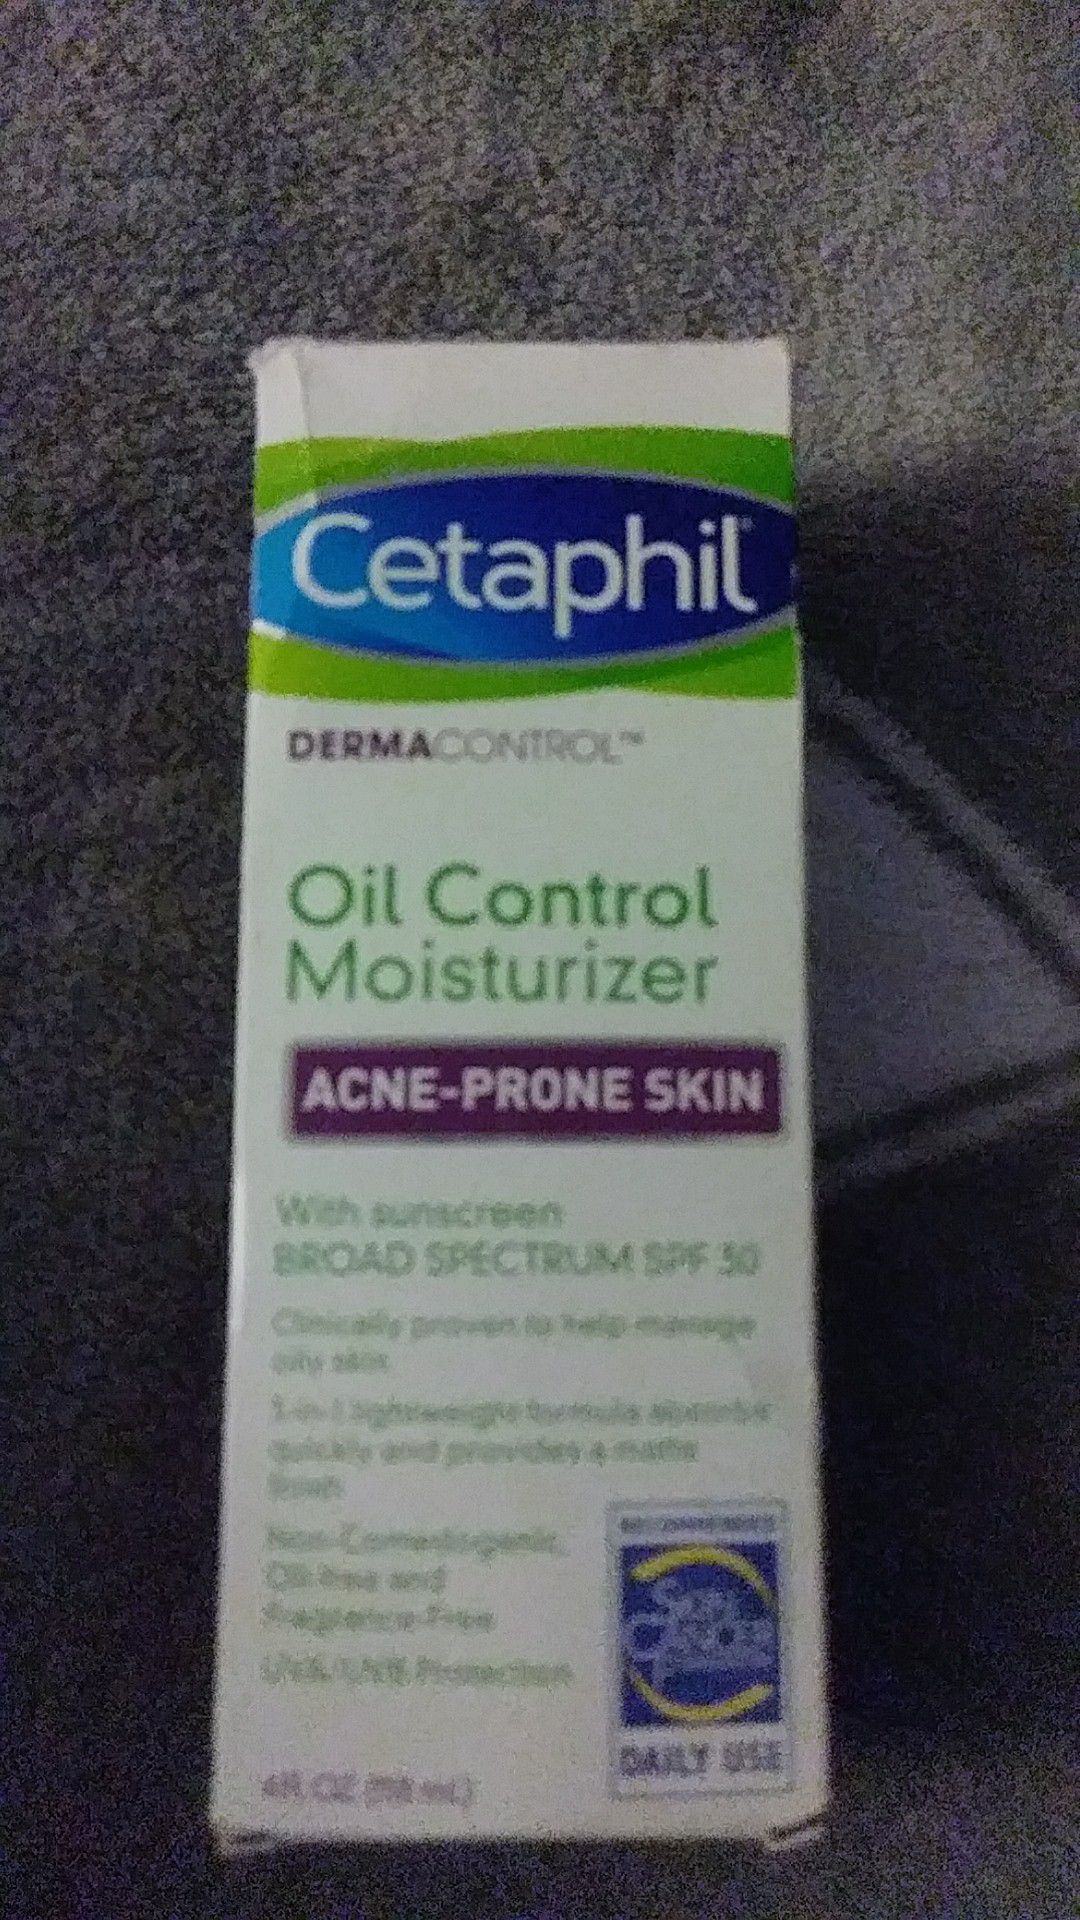 $10 Cetaphil Derma control oil control moisturizer acne-prone skin with sunscreen bored Spectrum SPF30 (recommended Skin Cancer Foundation daily use)